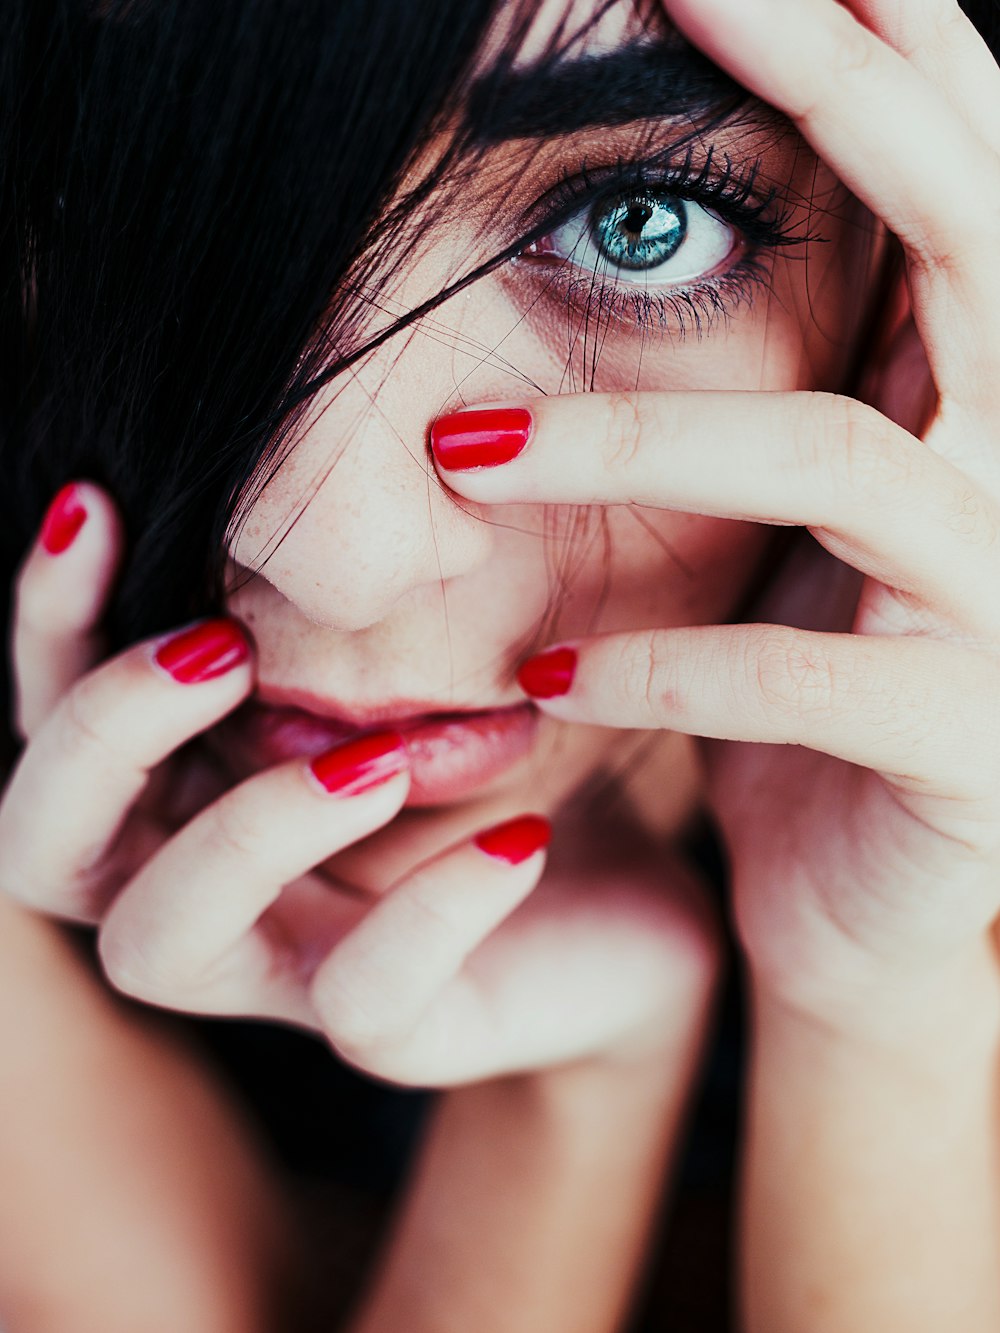 a close up of a person with red nail polish